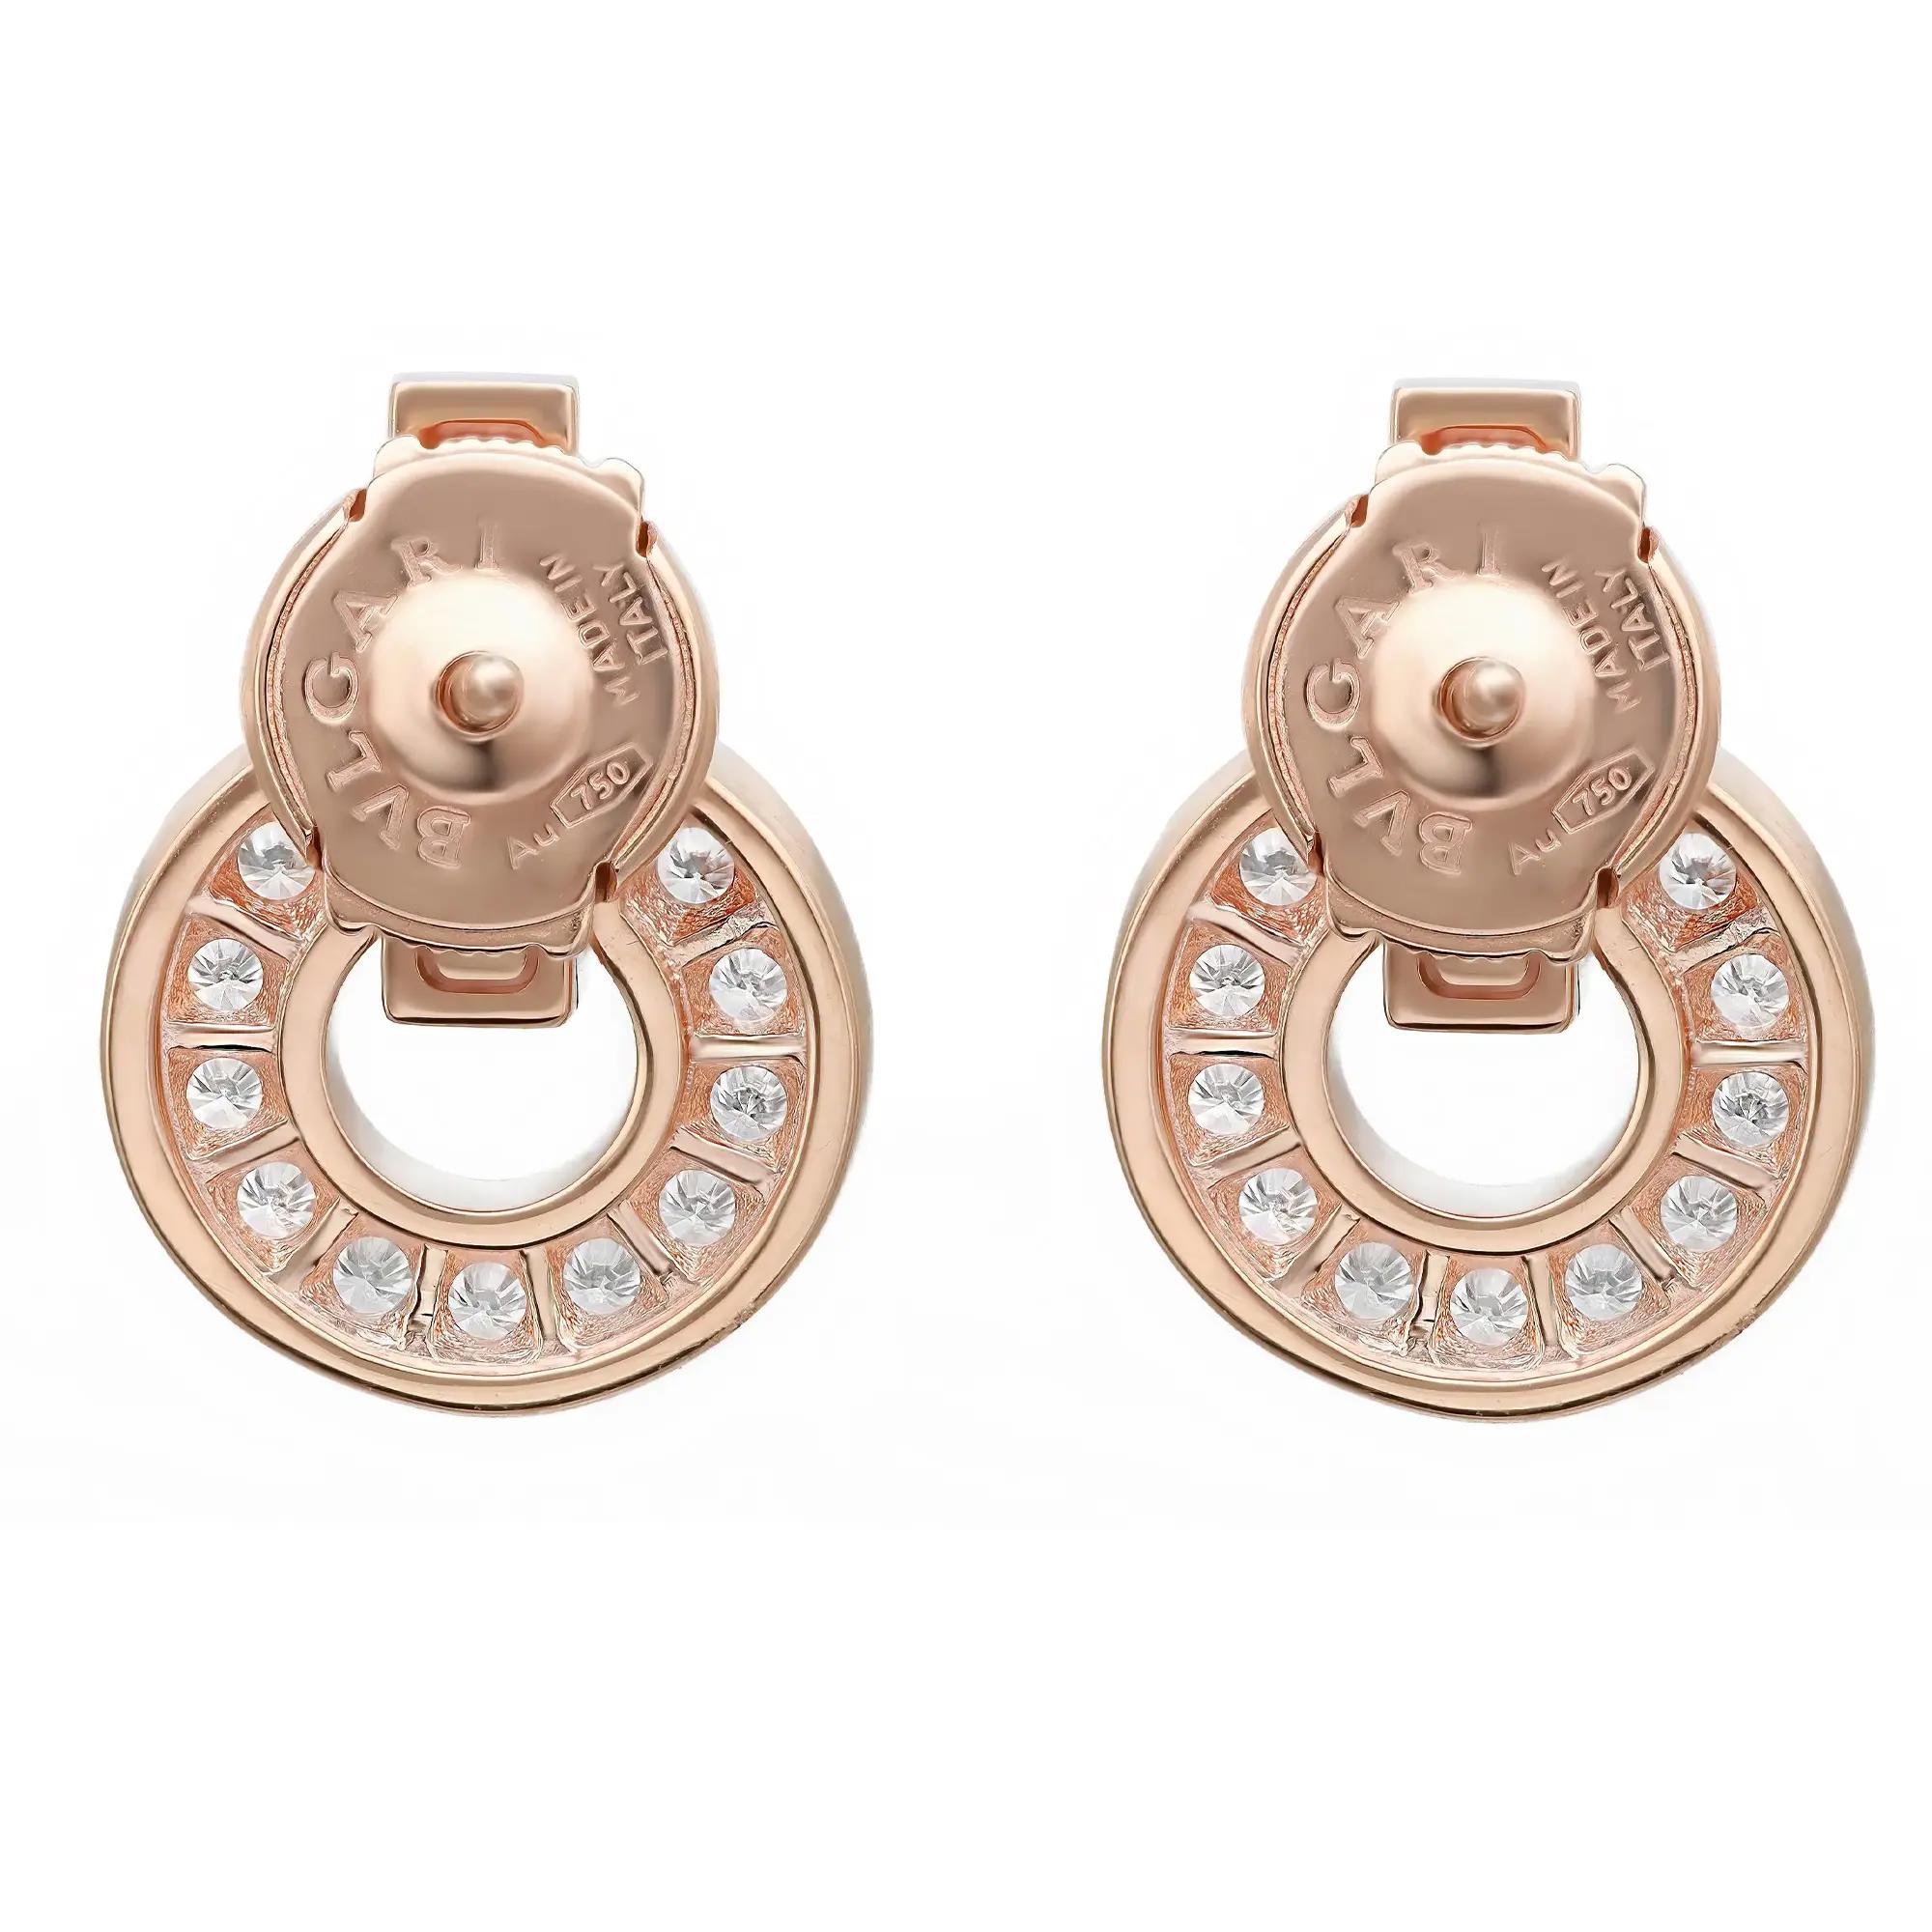 Beautiful and contemporary statement of sophistication, these Bvlgari Bvlgari diamond earrings are crafted in lustrous 18K rose gold. It features a Bvlgari logo engraved earring top attached to an iconic circular motif with an openwork design